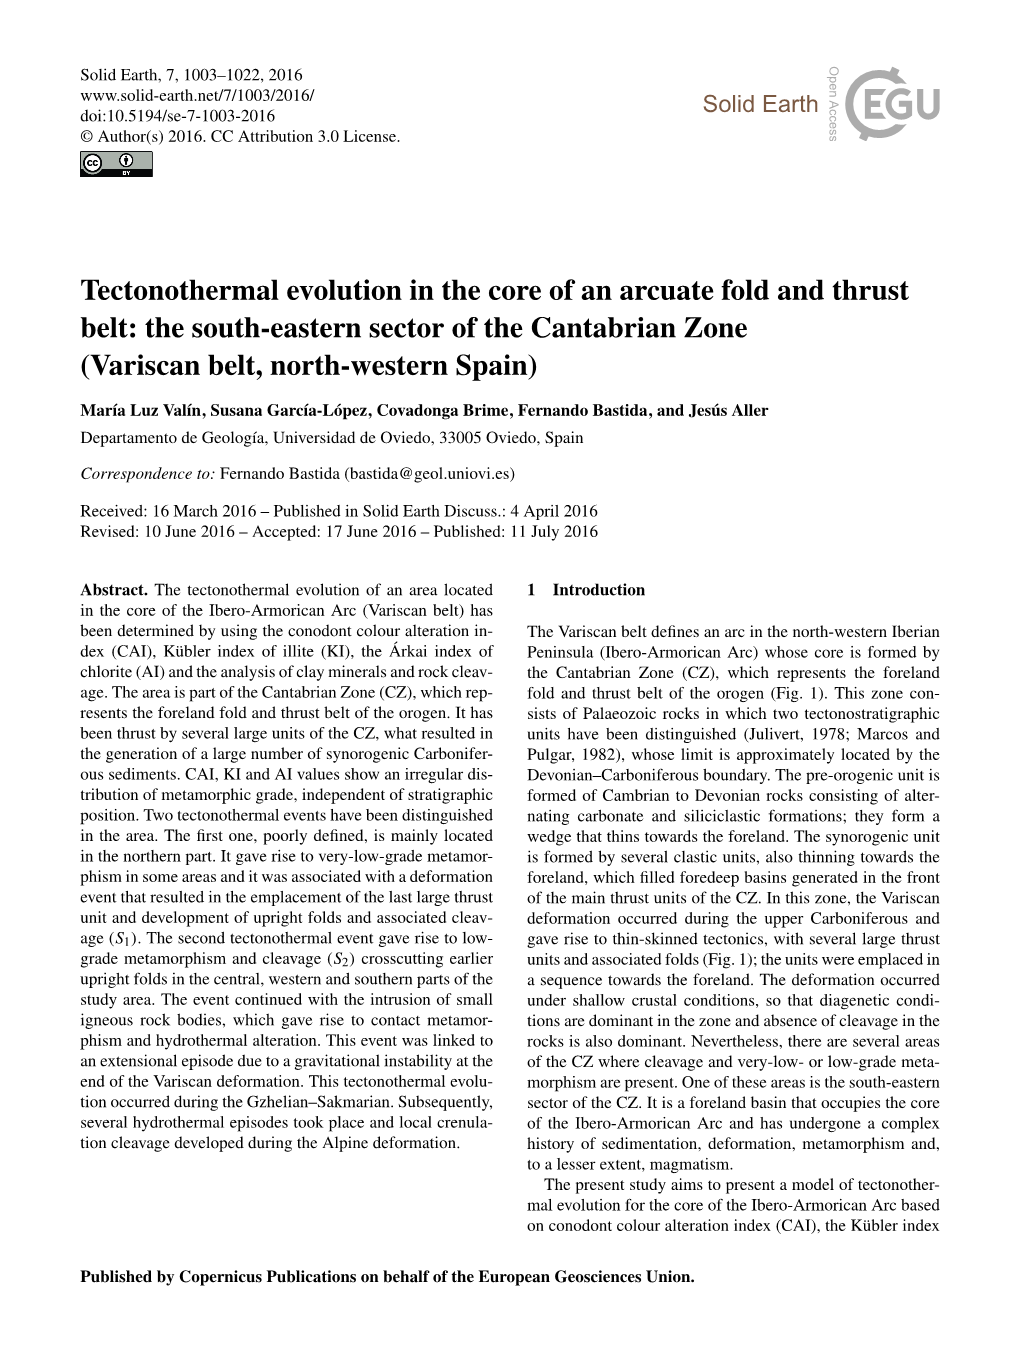 Tectonothermal Evolution in the Core of an Arcuate Fold and Thrust Belt: the South-Eastern Sector of the Cantabrian Zone (Variscan Belt, North-Western Spain)